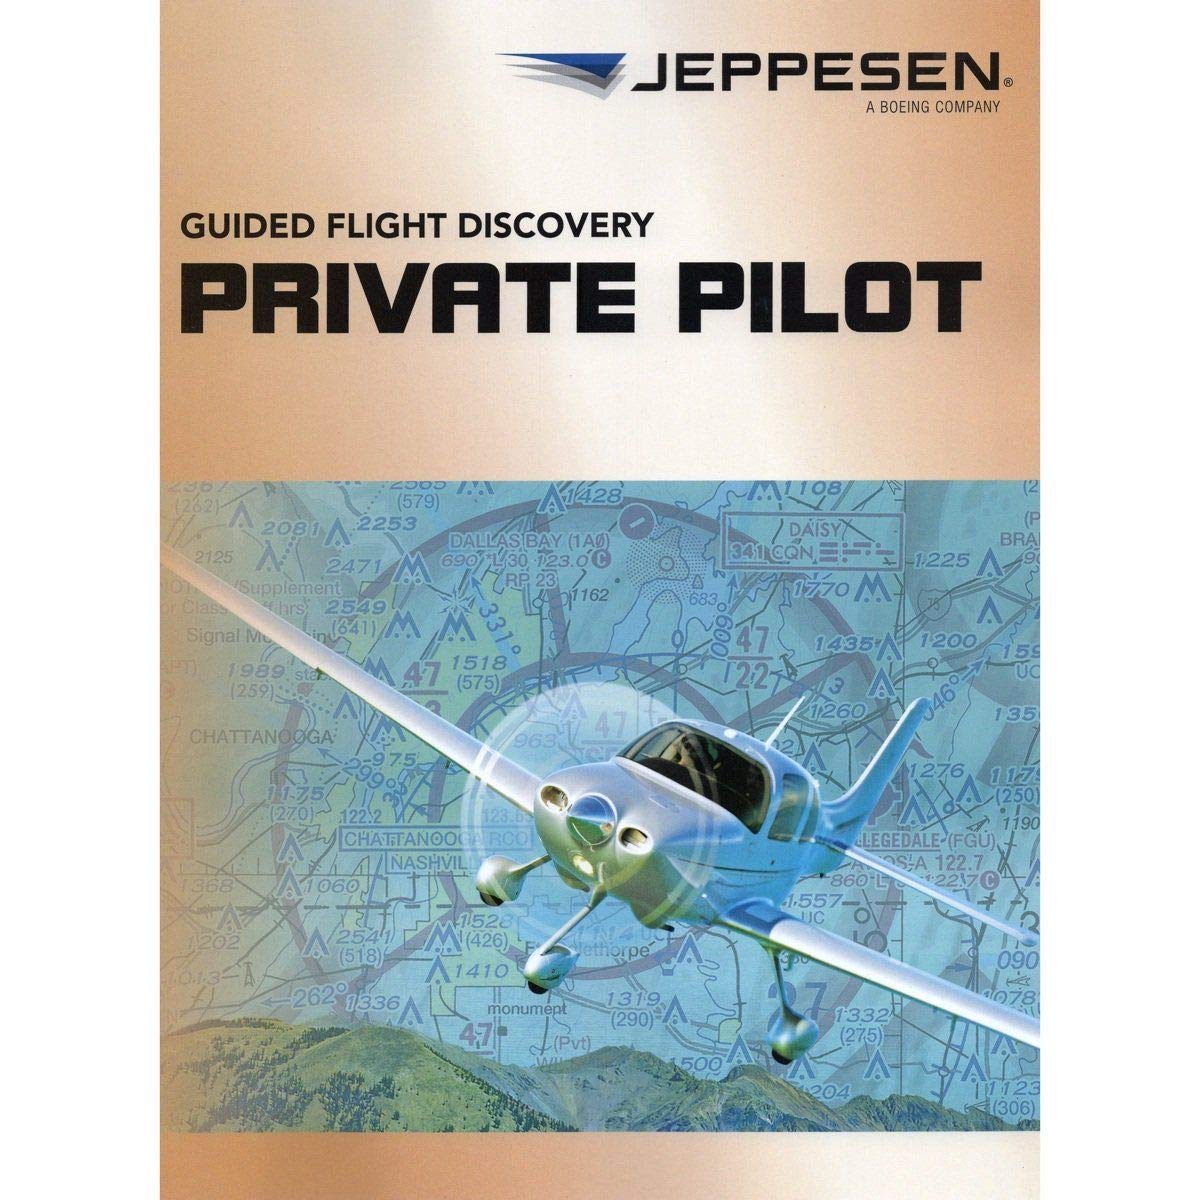 Private Pilot Manuals and Handbooks Needed For the Private Pilot License